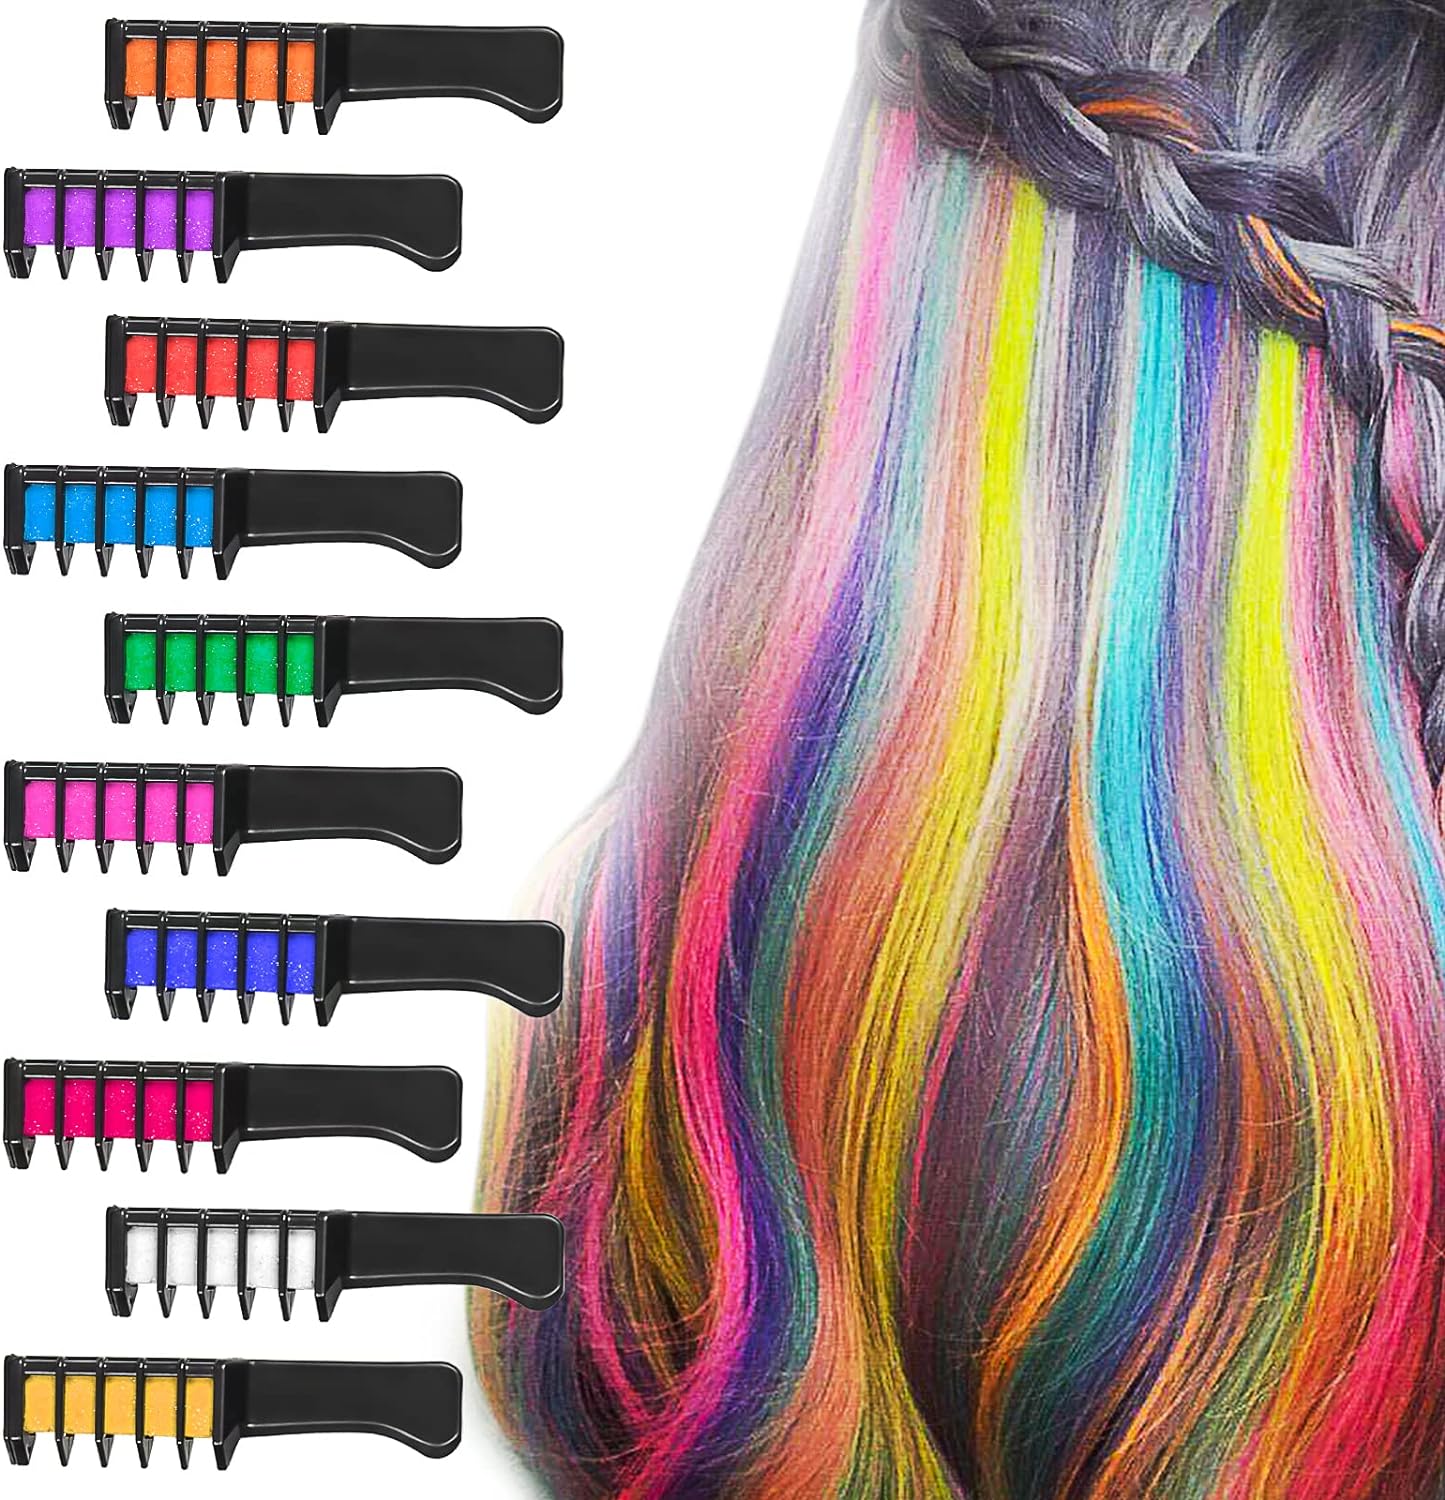 BATTOP 10PCS Hair Chalk Comb Temporary Bright Hair Color Cream for Girls Kids Women Gifts for Halloween Makeup Birthday Washable